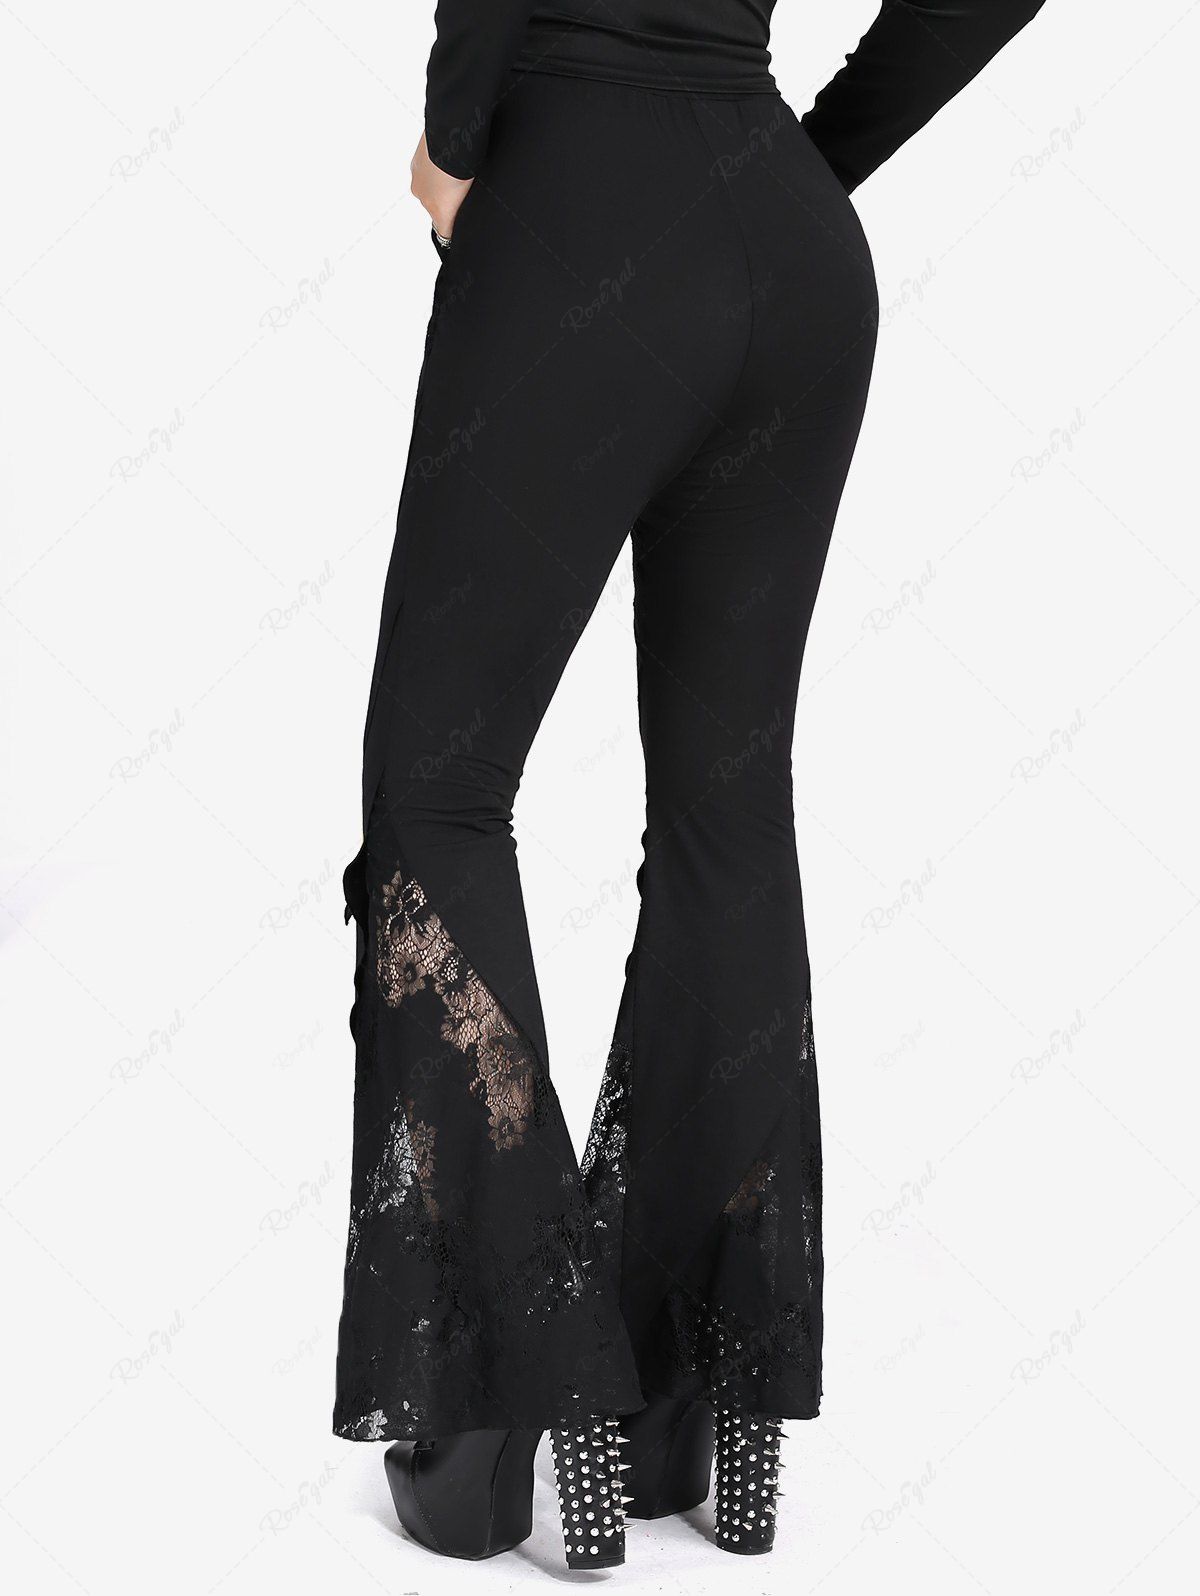 Gothic Floral Lace Panel Layered Pockets Solid Flare Pants